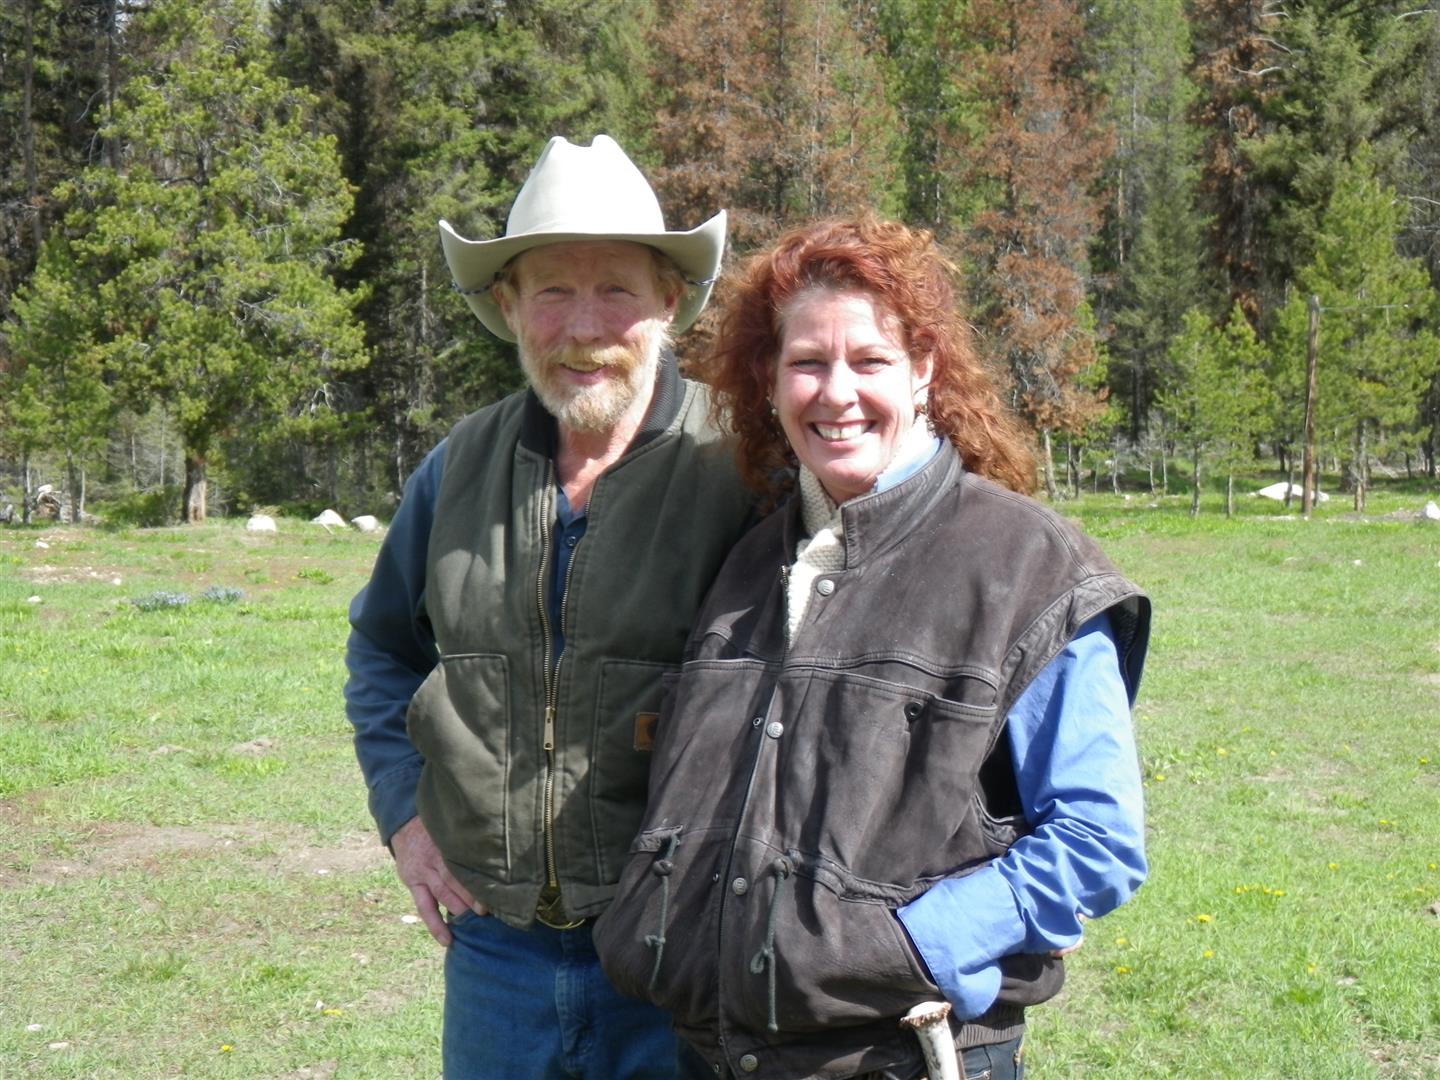 Kiere and ValDean Schroeder are the perfect hosts, and love sharing the ranch and wilderness with visitors. Want to hike? They can suggest an almost endless variety of routes. Photo by Colleen Back.